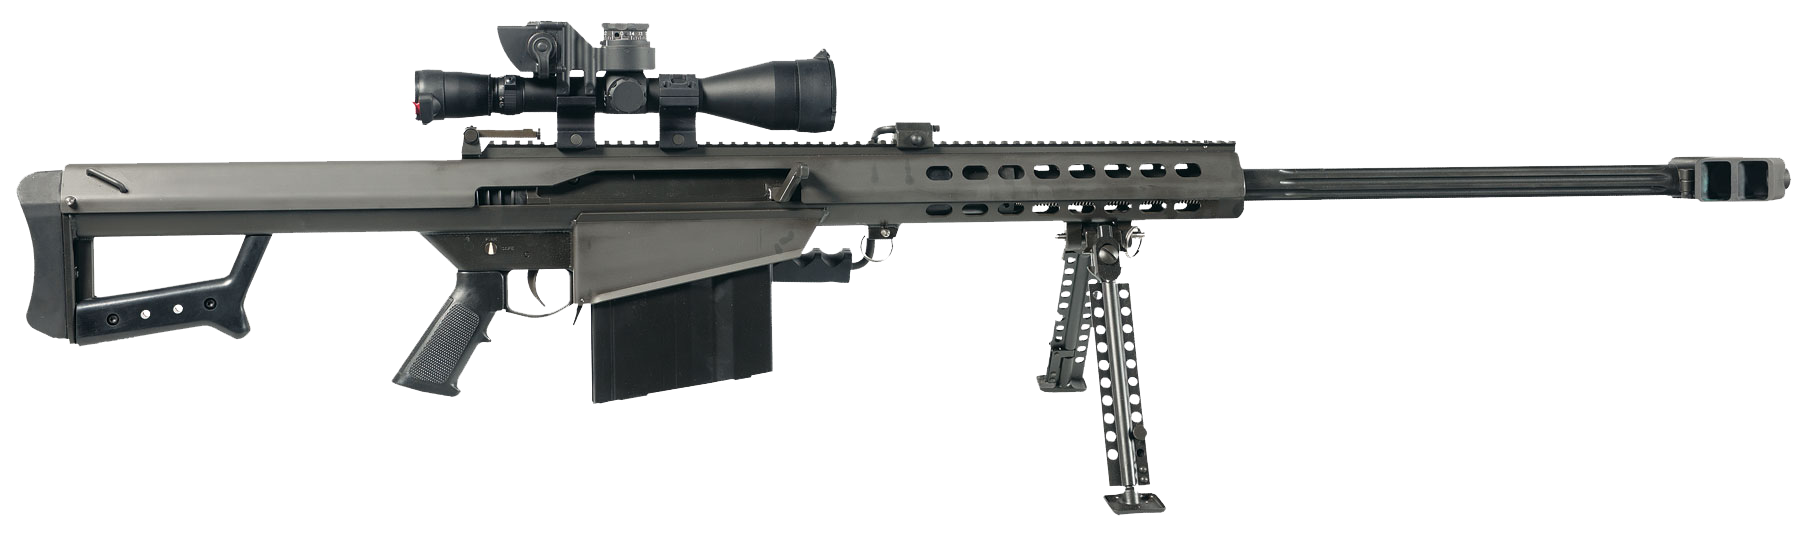 Sniper rifle PNG